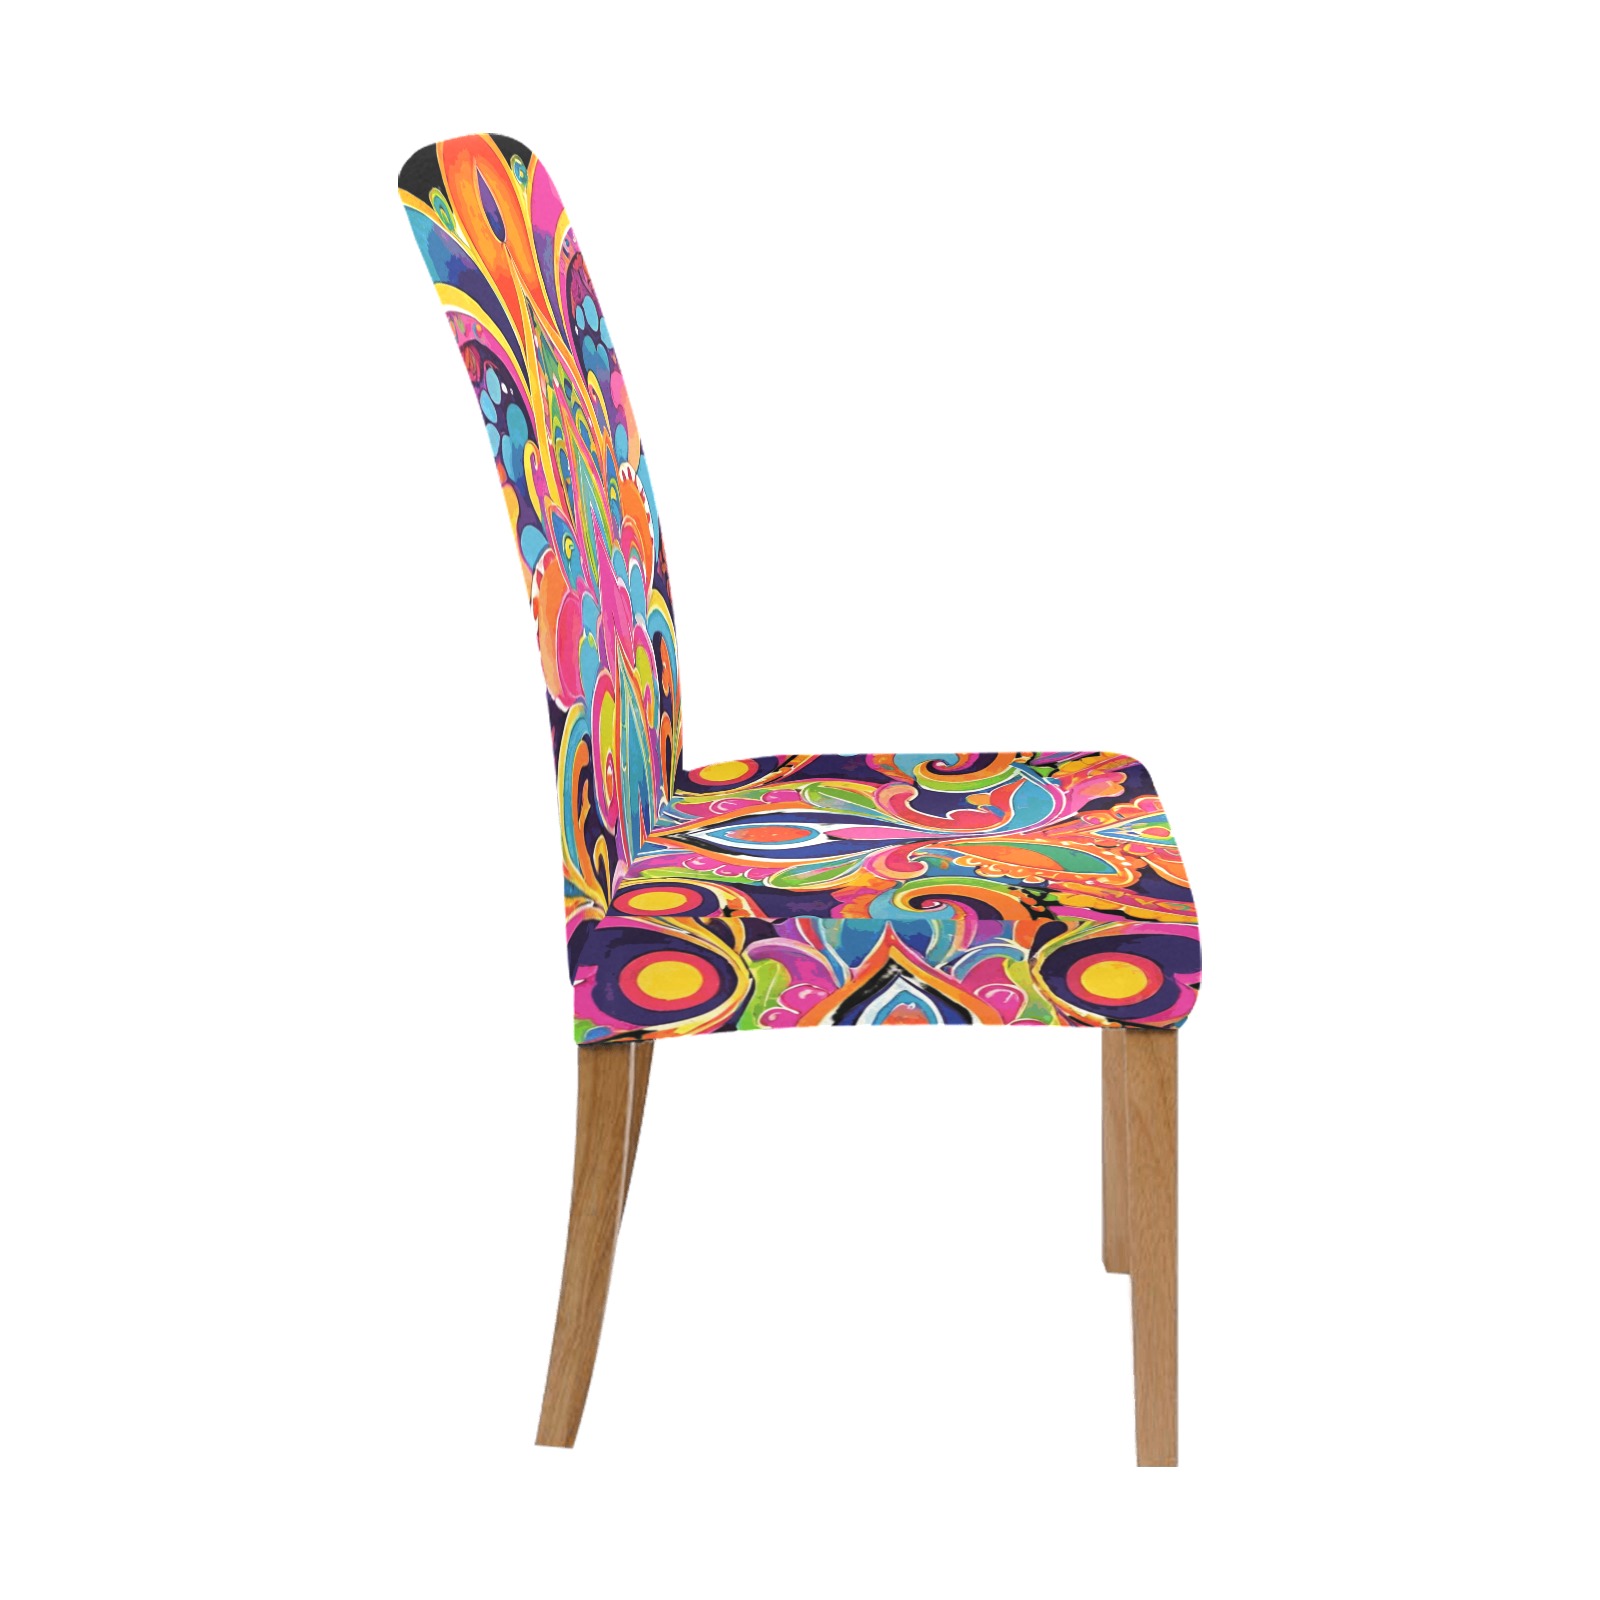 Abstract Retro Hippie Paisley Floral Removable Dining Chair Cover